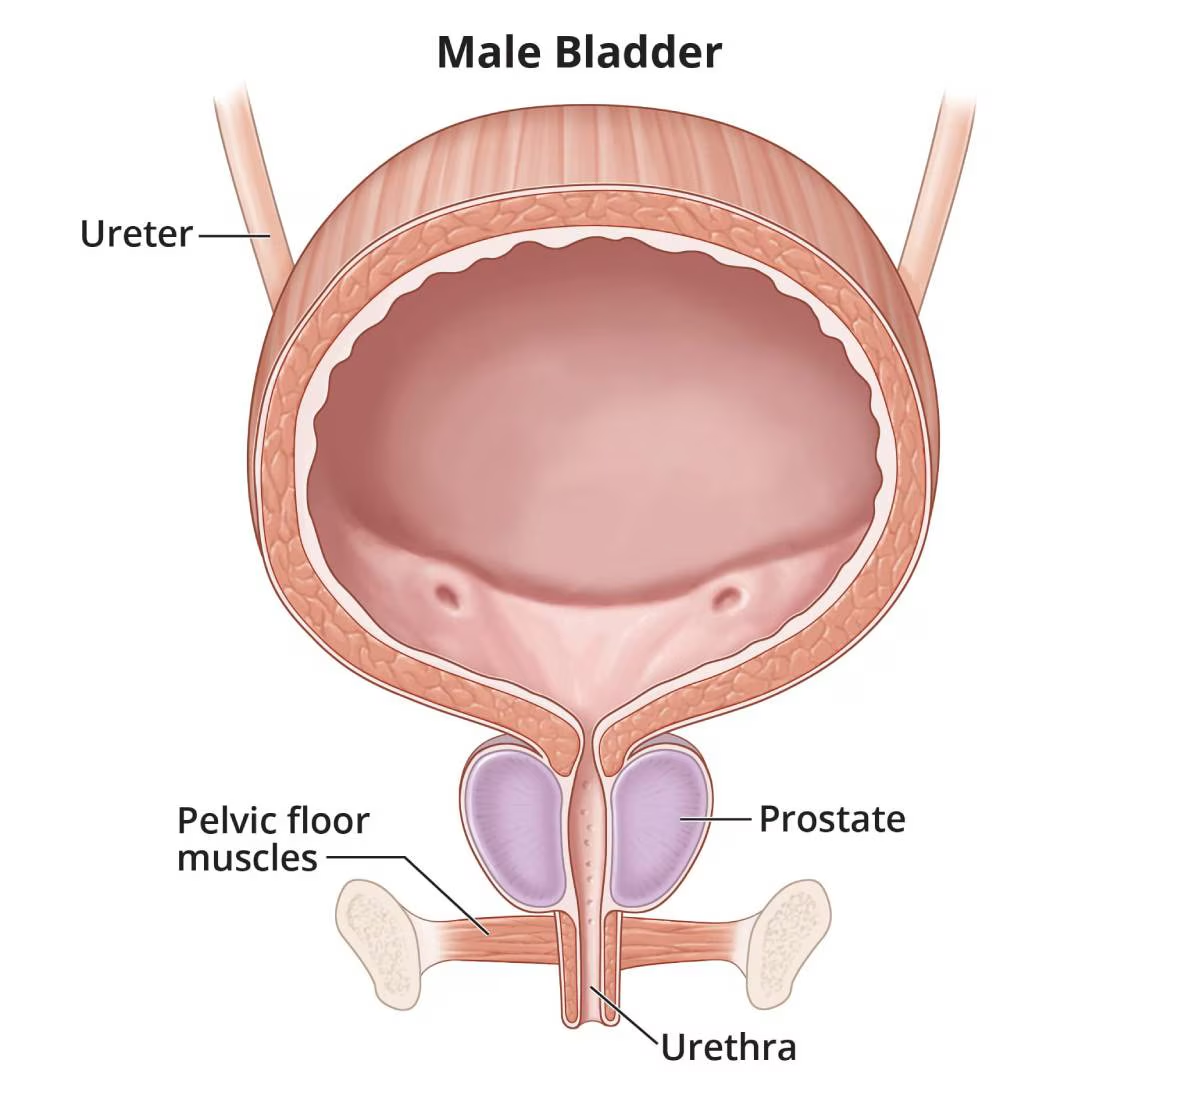 <p>✶The bladder is contained in the floor of the abdominal cavity.</p><p>✶By contracting abdominal muscles, the increased intra-abdominal pressure is transmitted to the bladder and urethra.</p><p>✶Reflex contraction of peri-urethral striated muscles also helps compress the urethra, aiding the micturition reflex.</p>